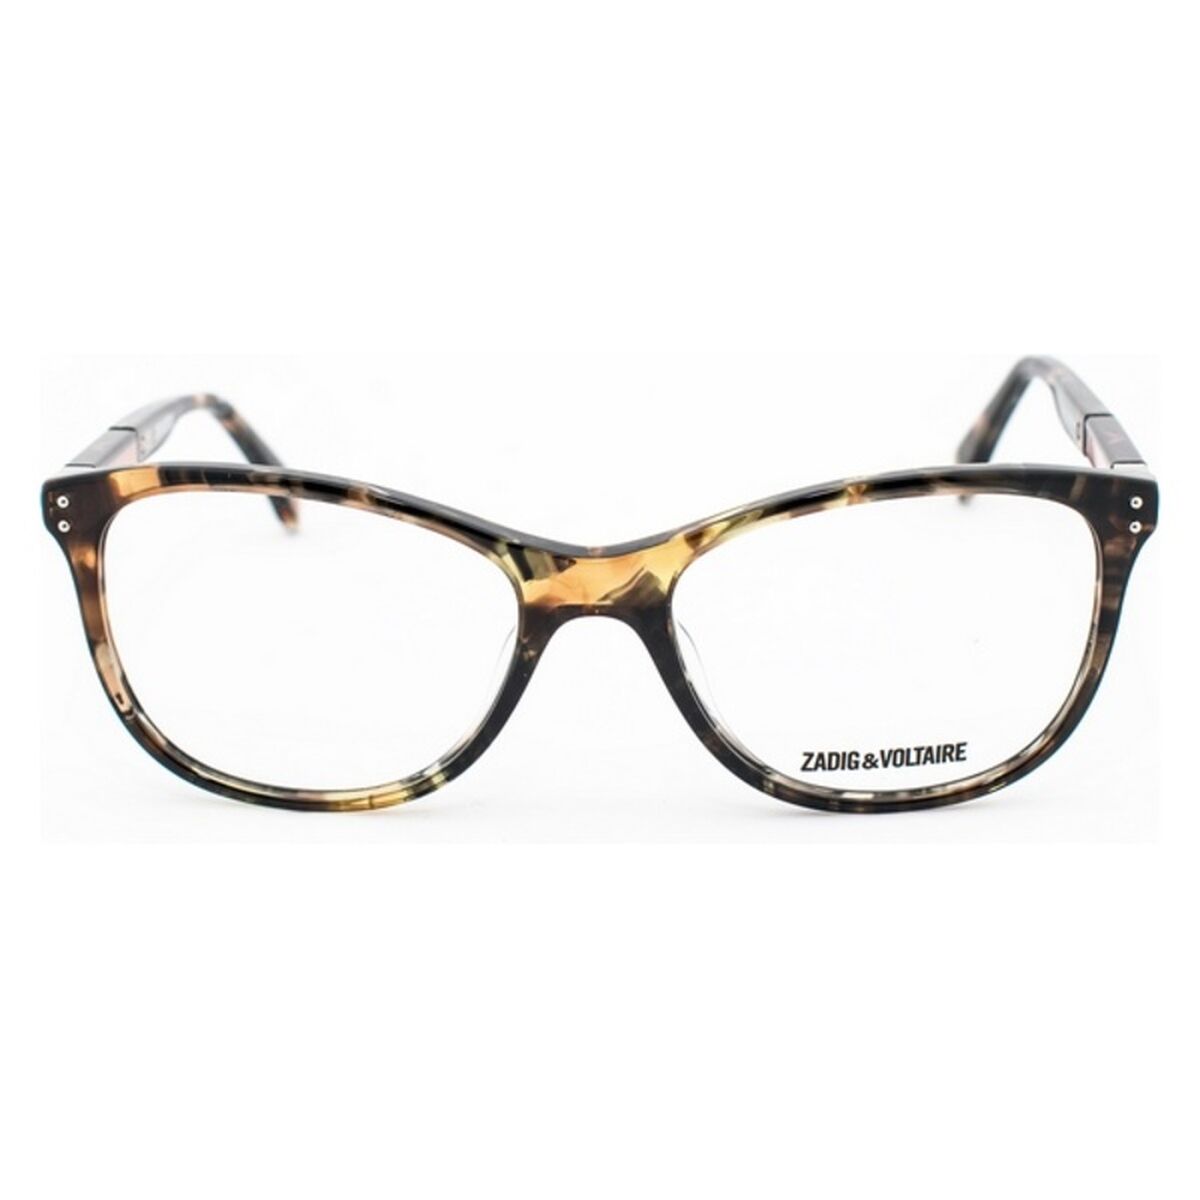 Ladies' Spectacle frame Zadig & Voltaire VZV158-0756